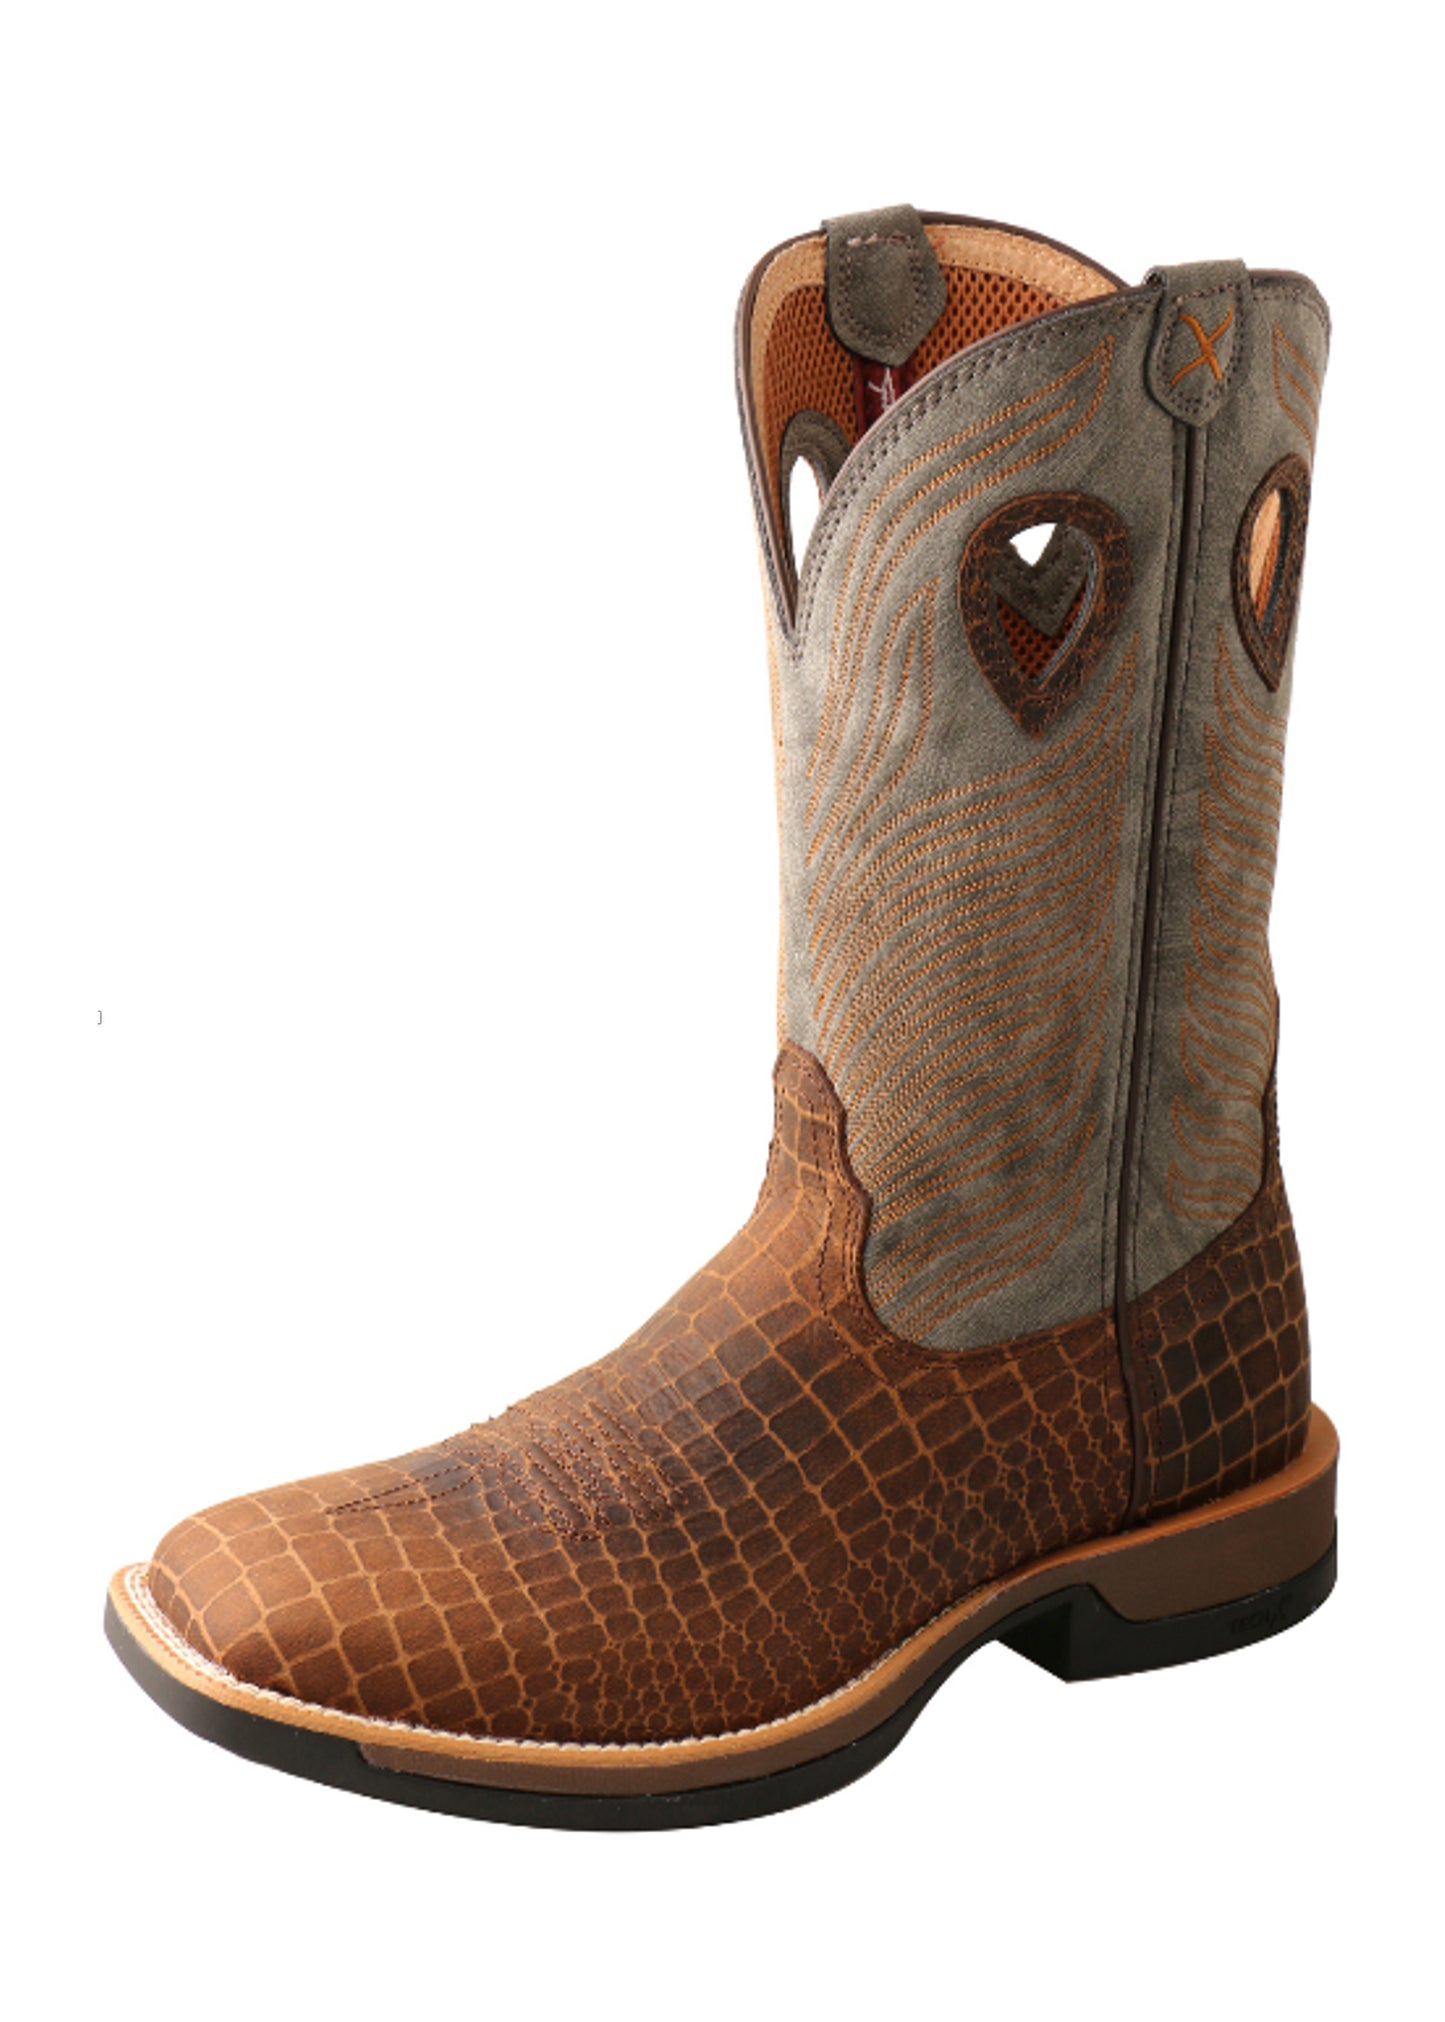 Twisted X Mens 12" Tech X Boot - TCMXW0003 - Brown/Grey